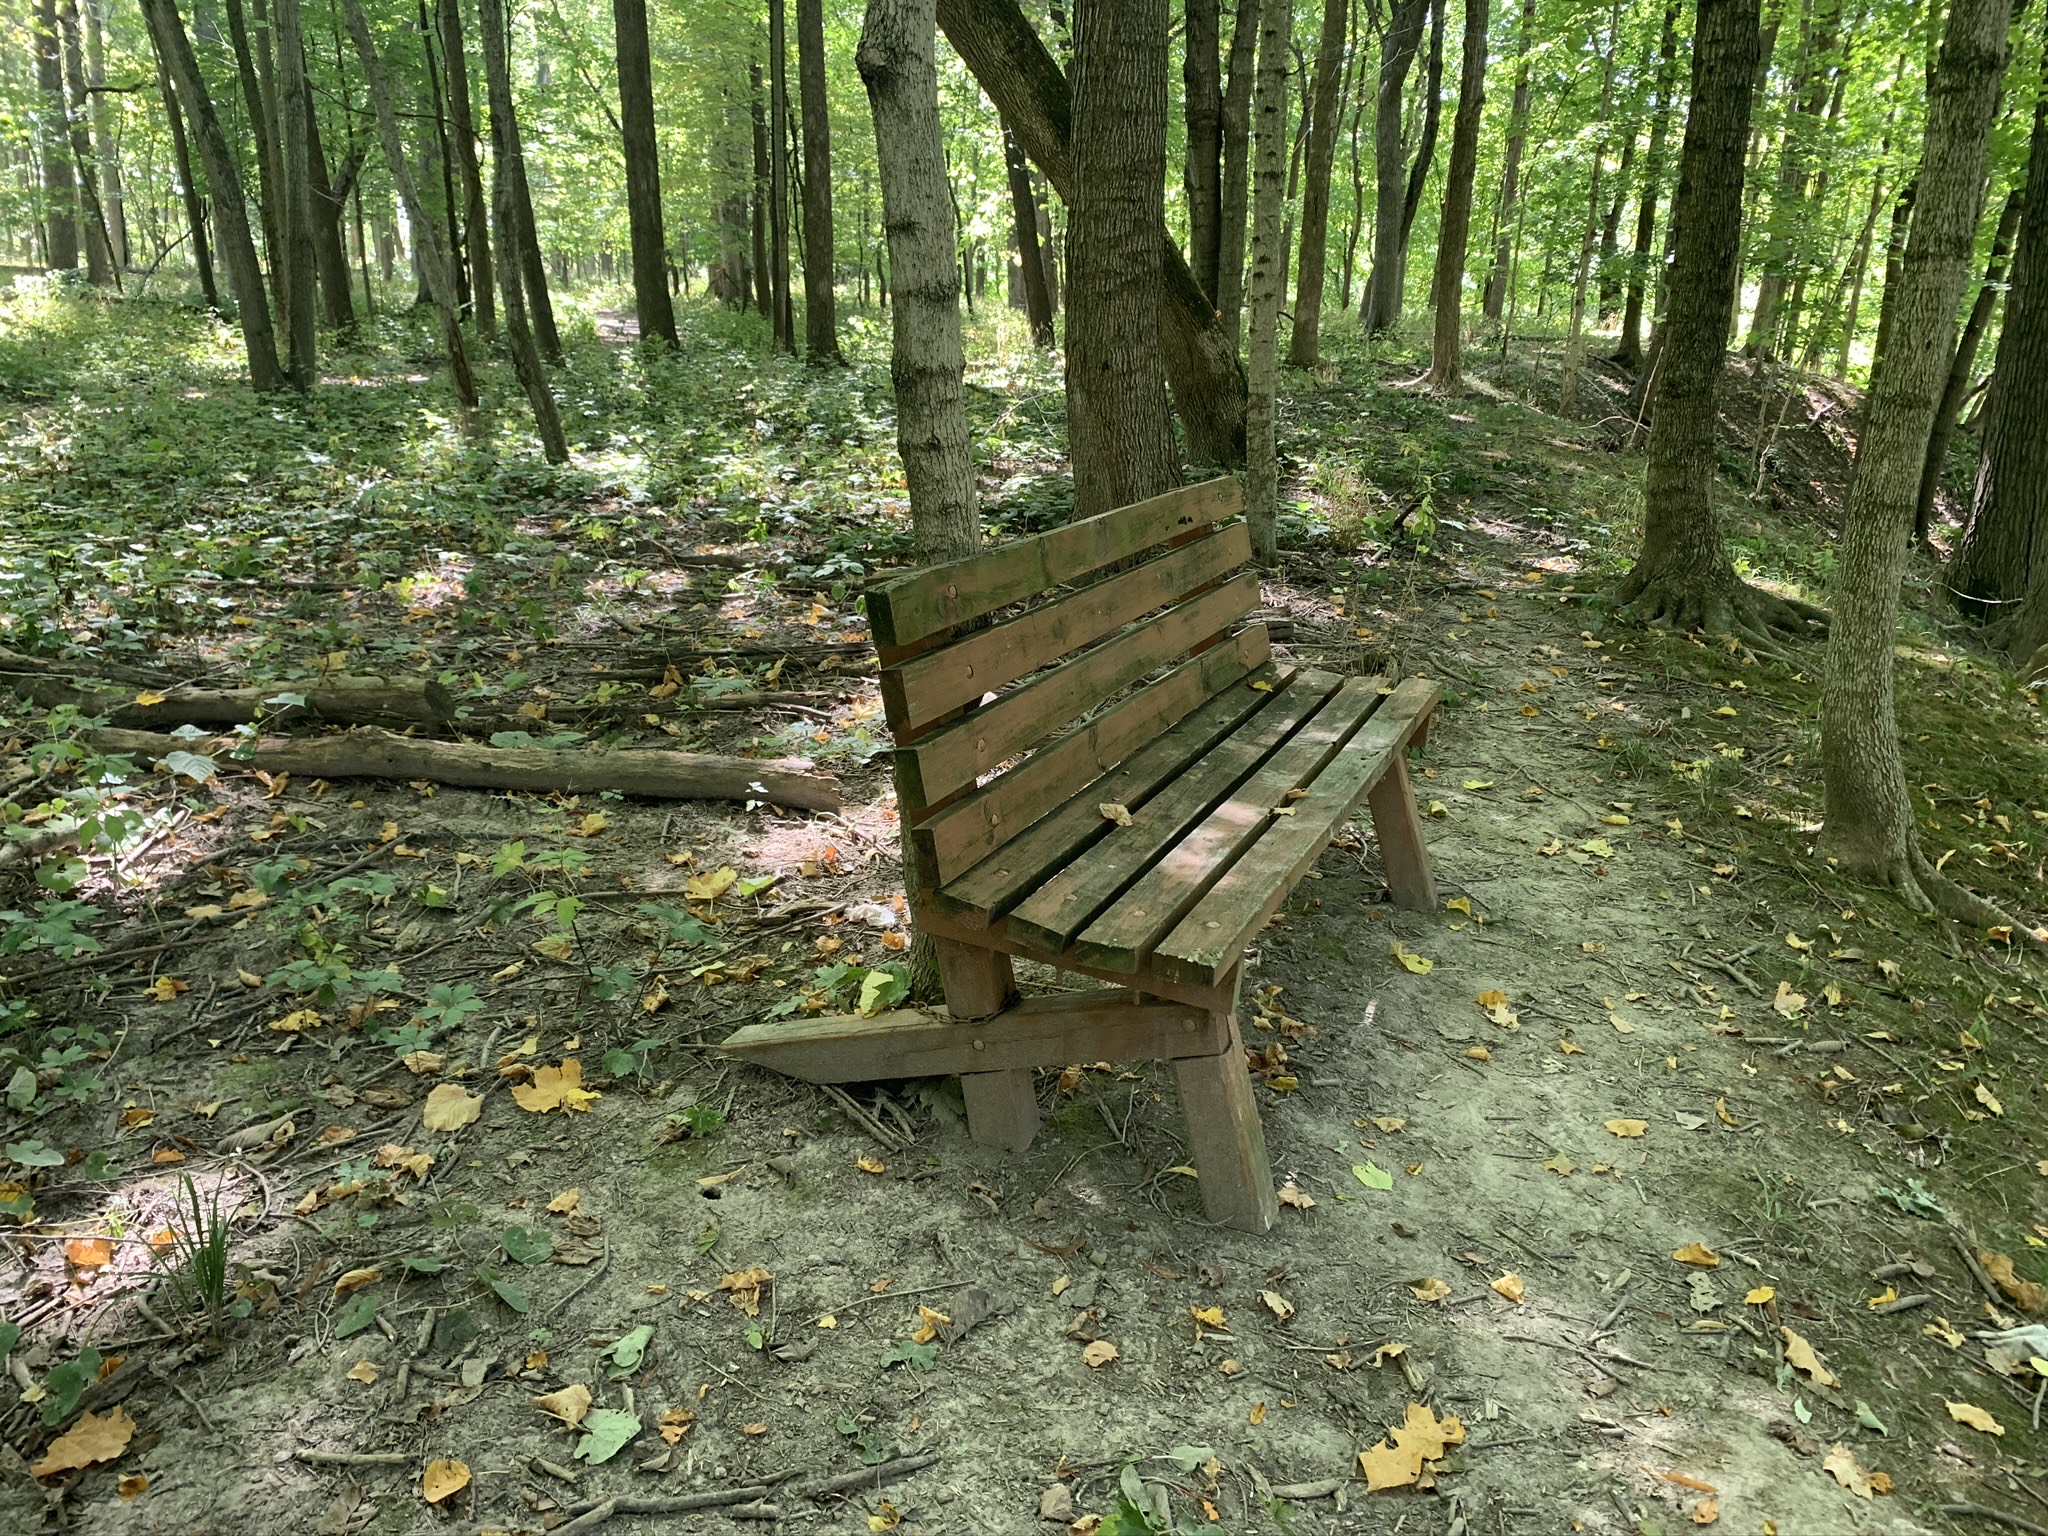 A wooden bench in the forest overlooking the salt fork river.